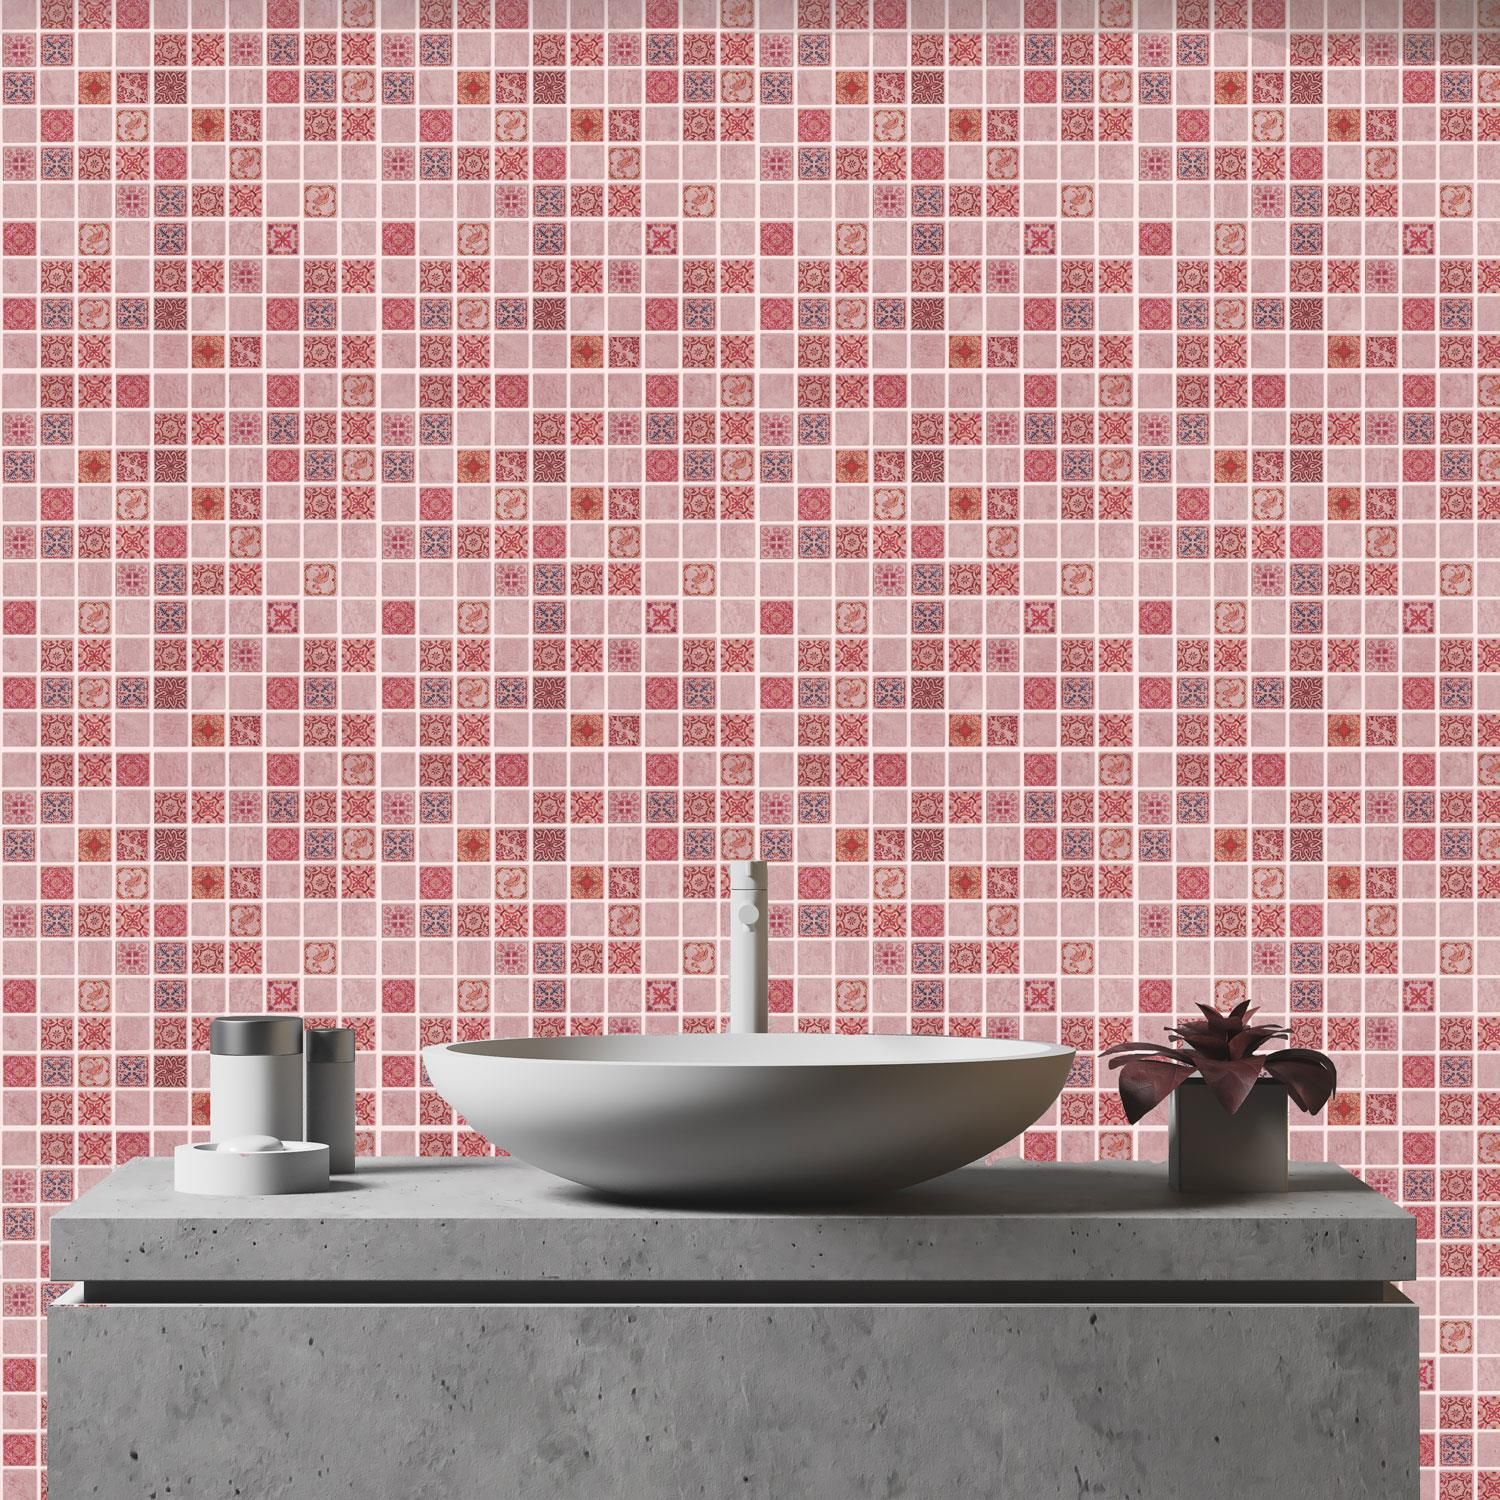 -Enhance your rooms decoration with our vintage and warm Pink Marble Vintage Azulejo Mosaic Wall Tile Sticker Set!
- To apply, just peel and stick onto any clean, flat surfaces like wall, furniture or as window screen, and you are good to go! 
- Realistic print with long durability. Can be easily trimmed / cut to fit.
-Application Notes: Please only attach to the painted surface at least three weeks after painting and clean the surface prior to application.
-Package Contains  24 pieces of stickers 15 cm (6 in). Coverage area: 0.54 square meters